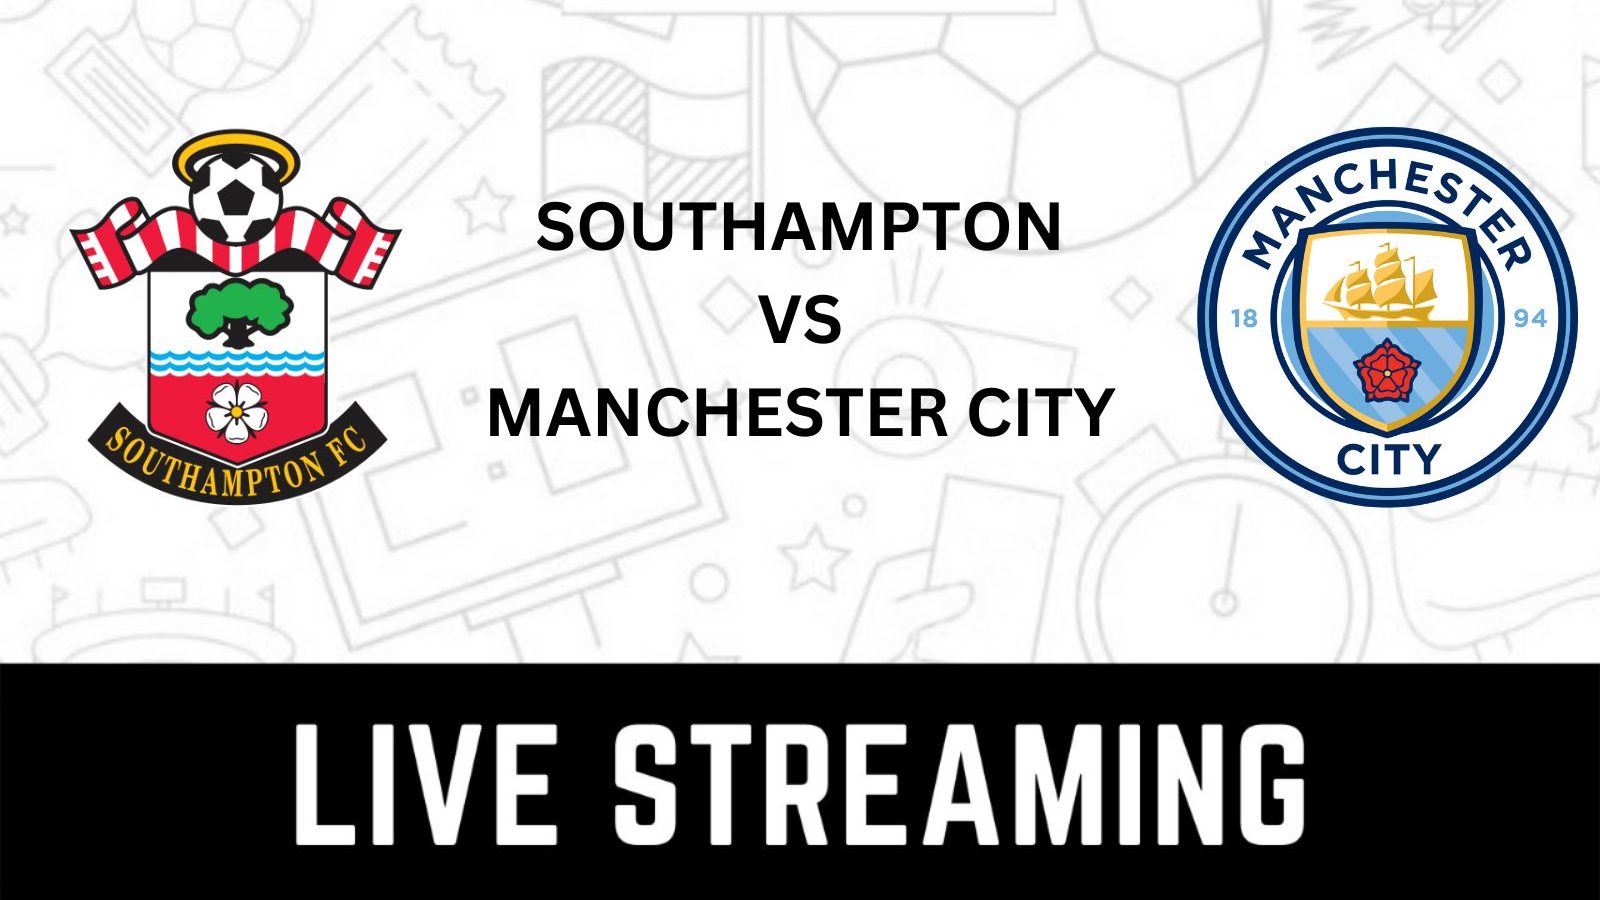 Southampton vs Manchester City EFL Cup Live Streaming When and Where to Watch Southampton vs Manchester City Match Live?